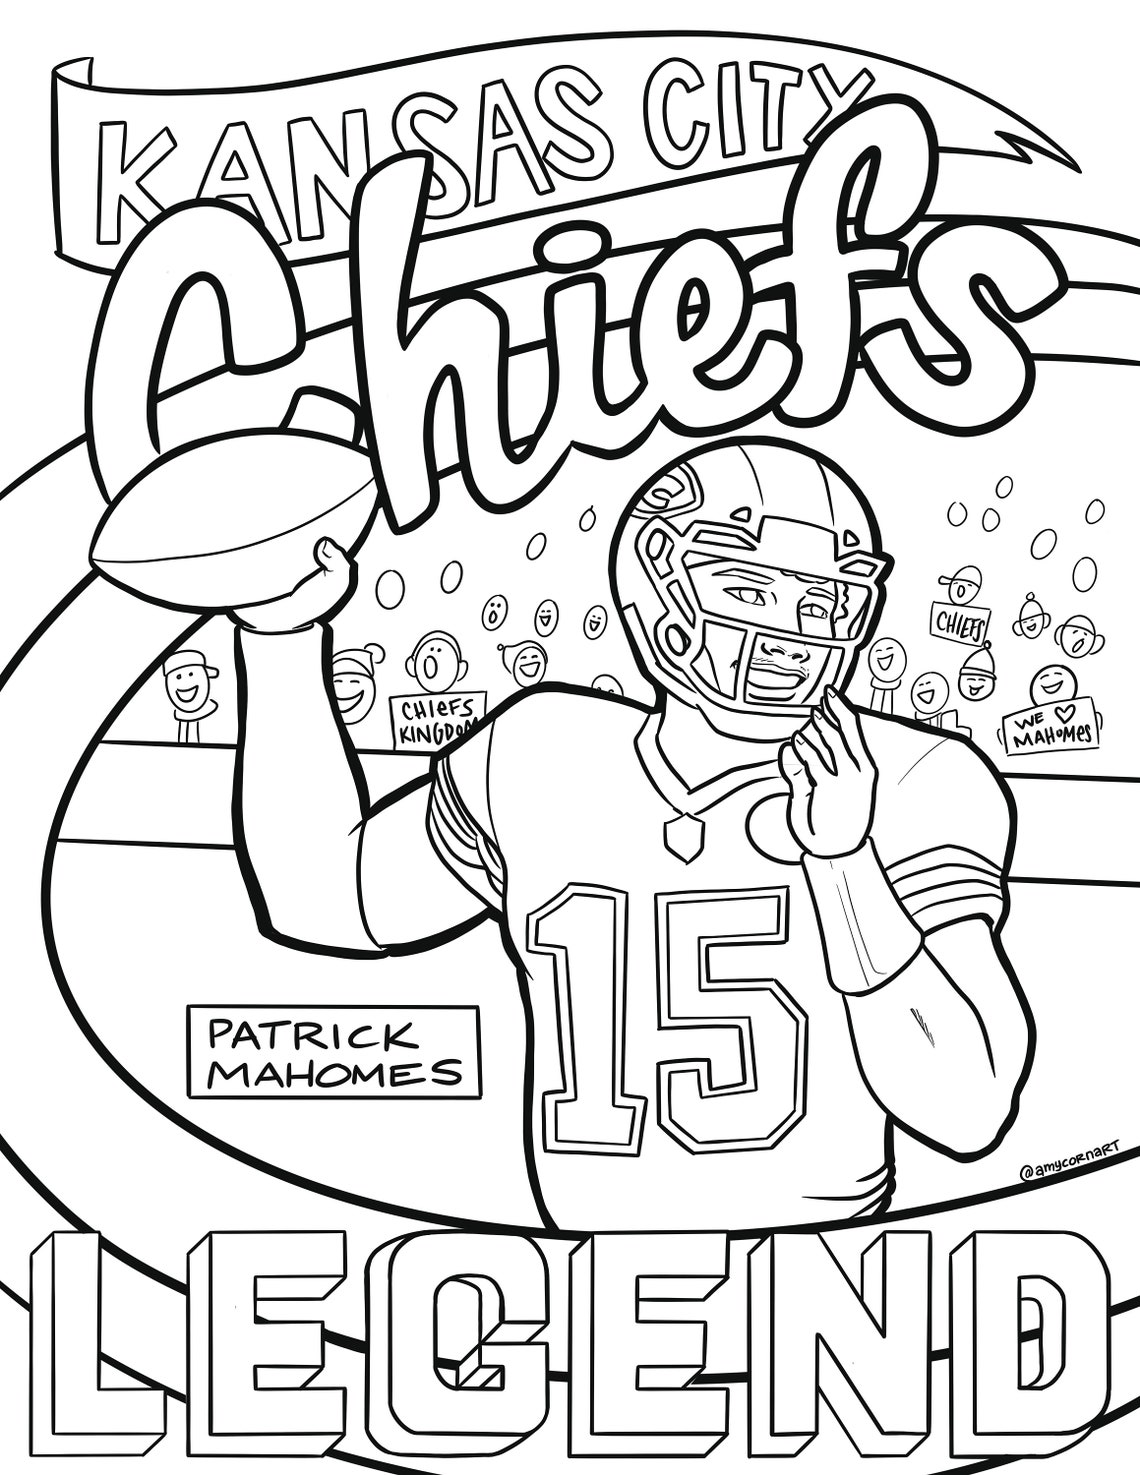 Kansas City Chiefs Mahomes Coloring Page Coloring Pages